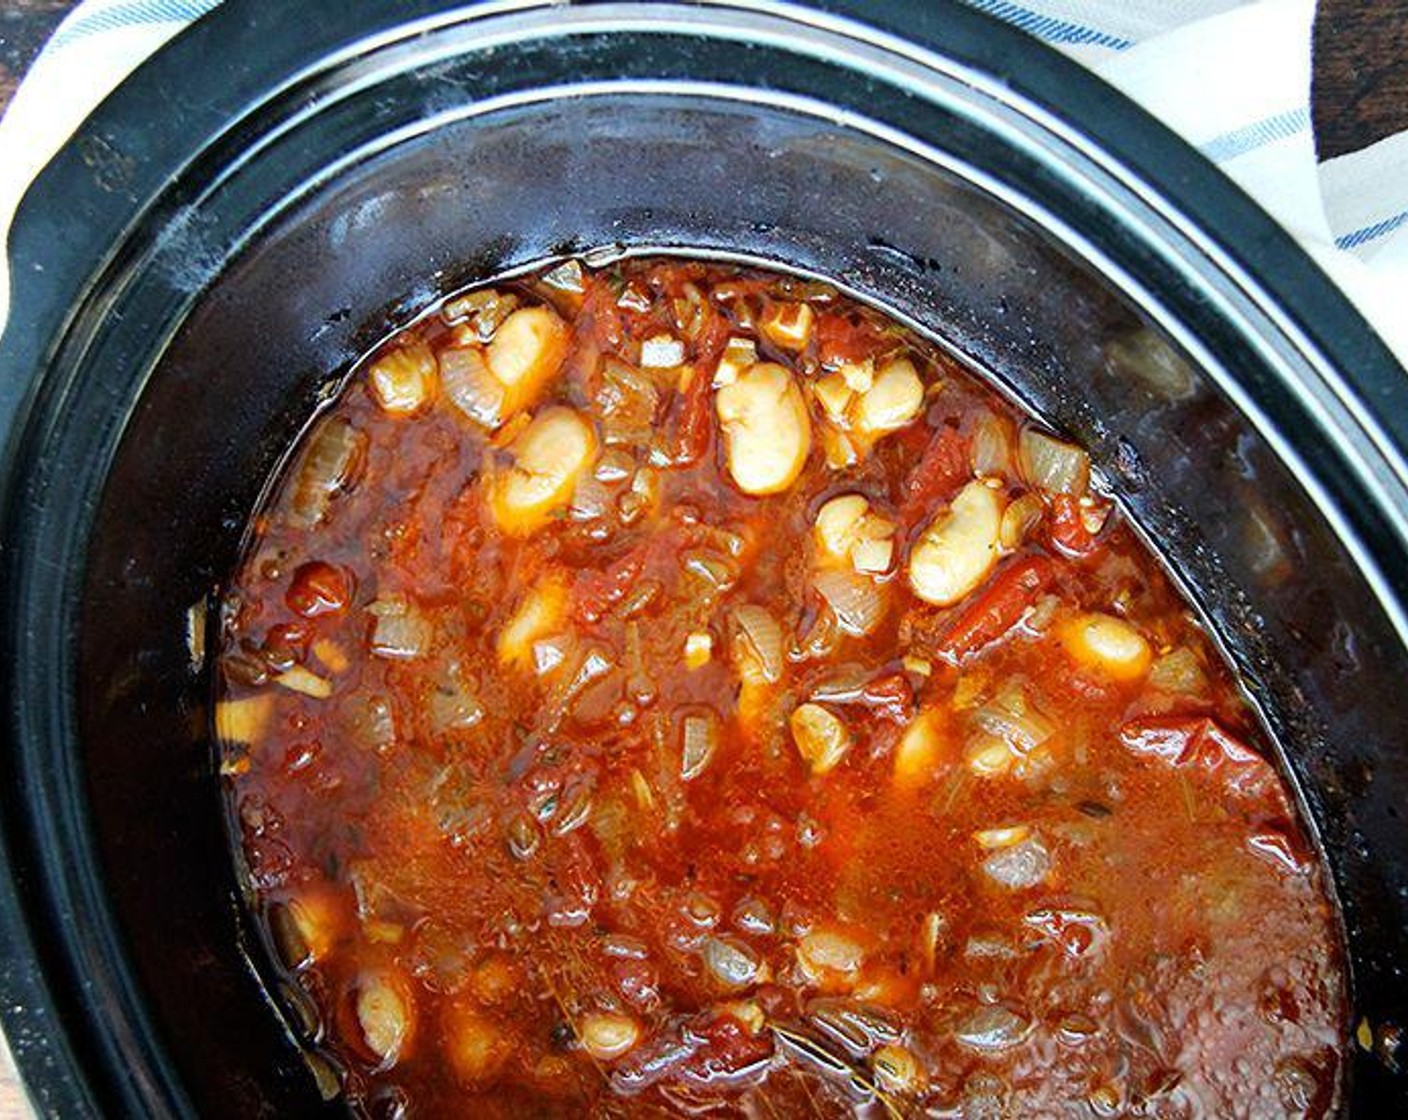 step 4 Remove the lid and add Kosher Salt (to taste). For half a pound of beans, I usually add 1 to 2 tsp when cooking with water- stock will need less. Continue cooking for as long as time permits — you can cook the beans anywhere from 2 to 6 more hours, just be sure to check on liquid levels every so often.